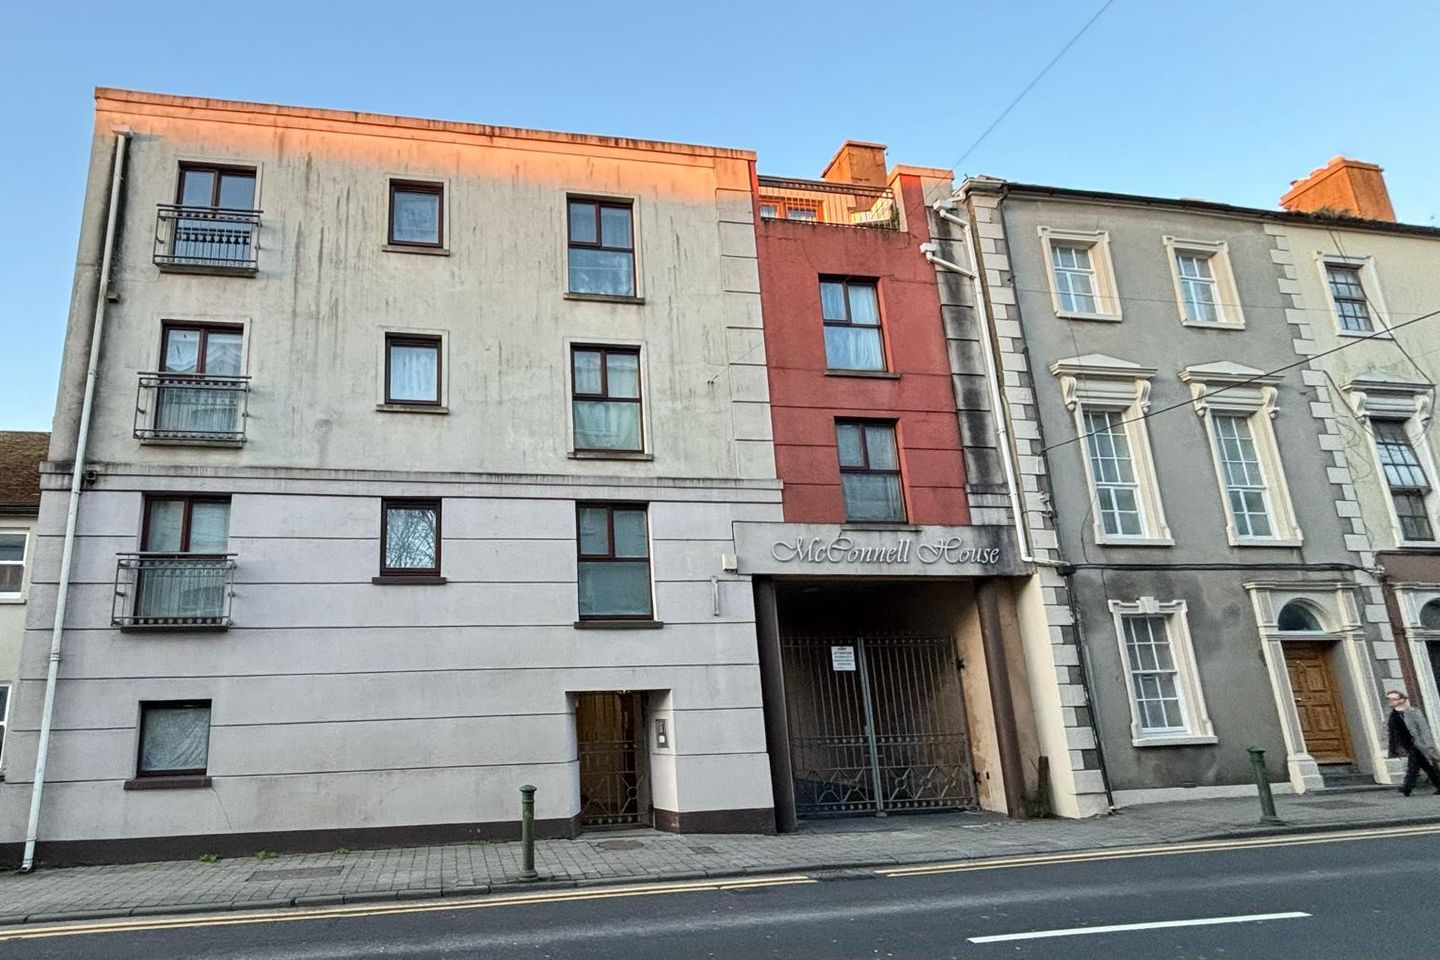 Apartment 5, McConnell House, Waterford City, Co. Waterford, X91Y426